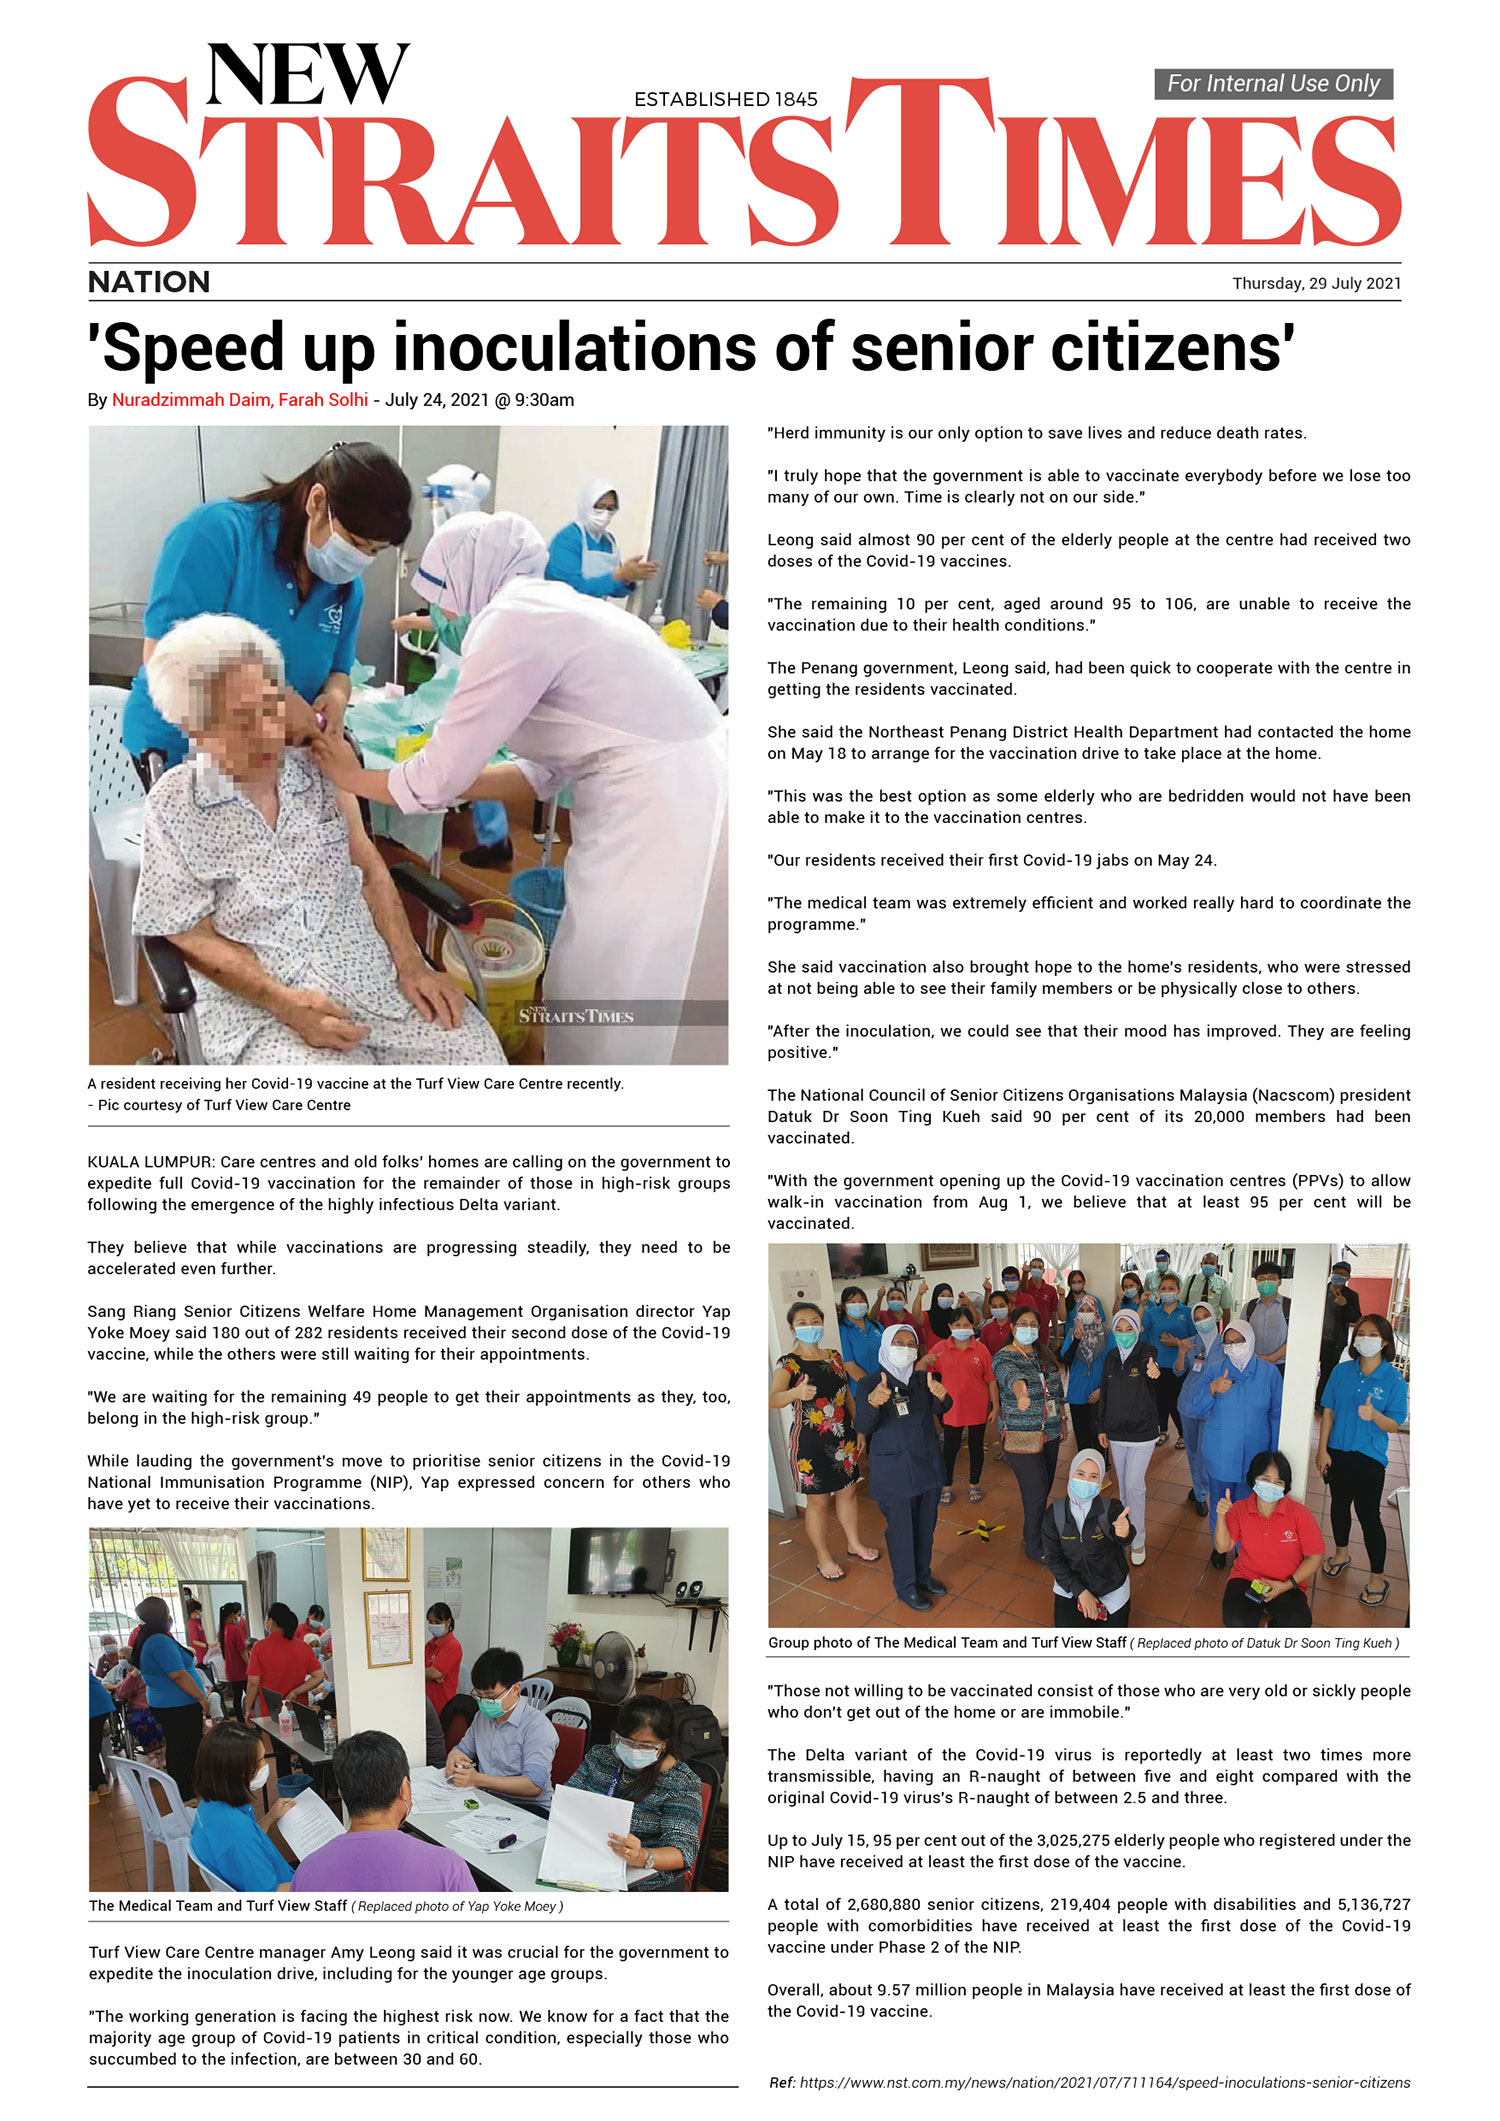 'Speed up inoculations of senior citizens' article published in NST, 24 July 2021.